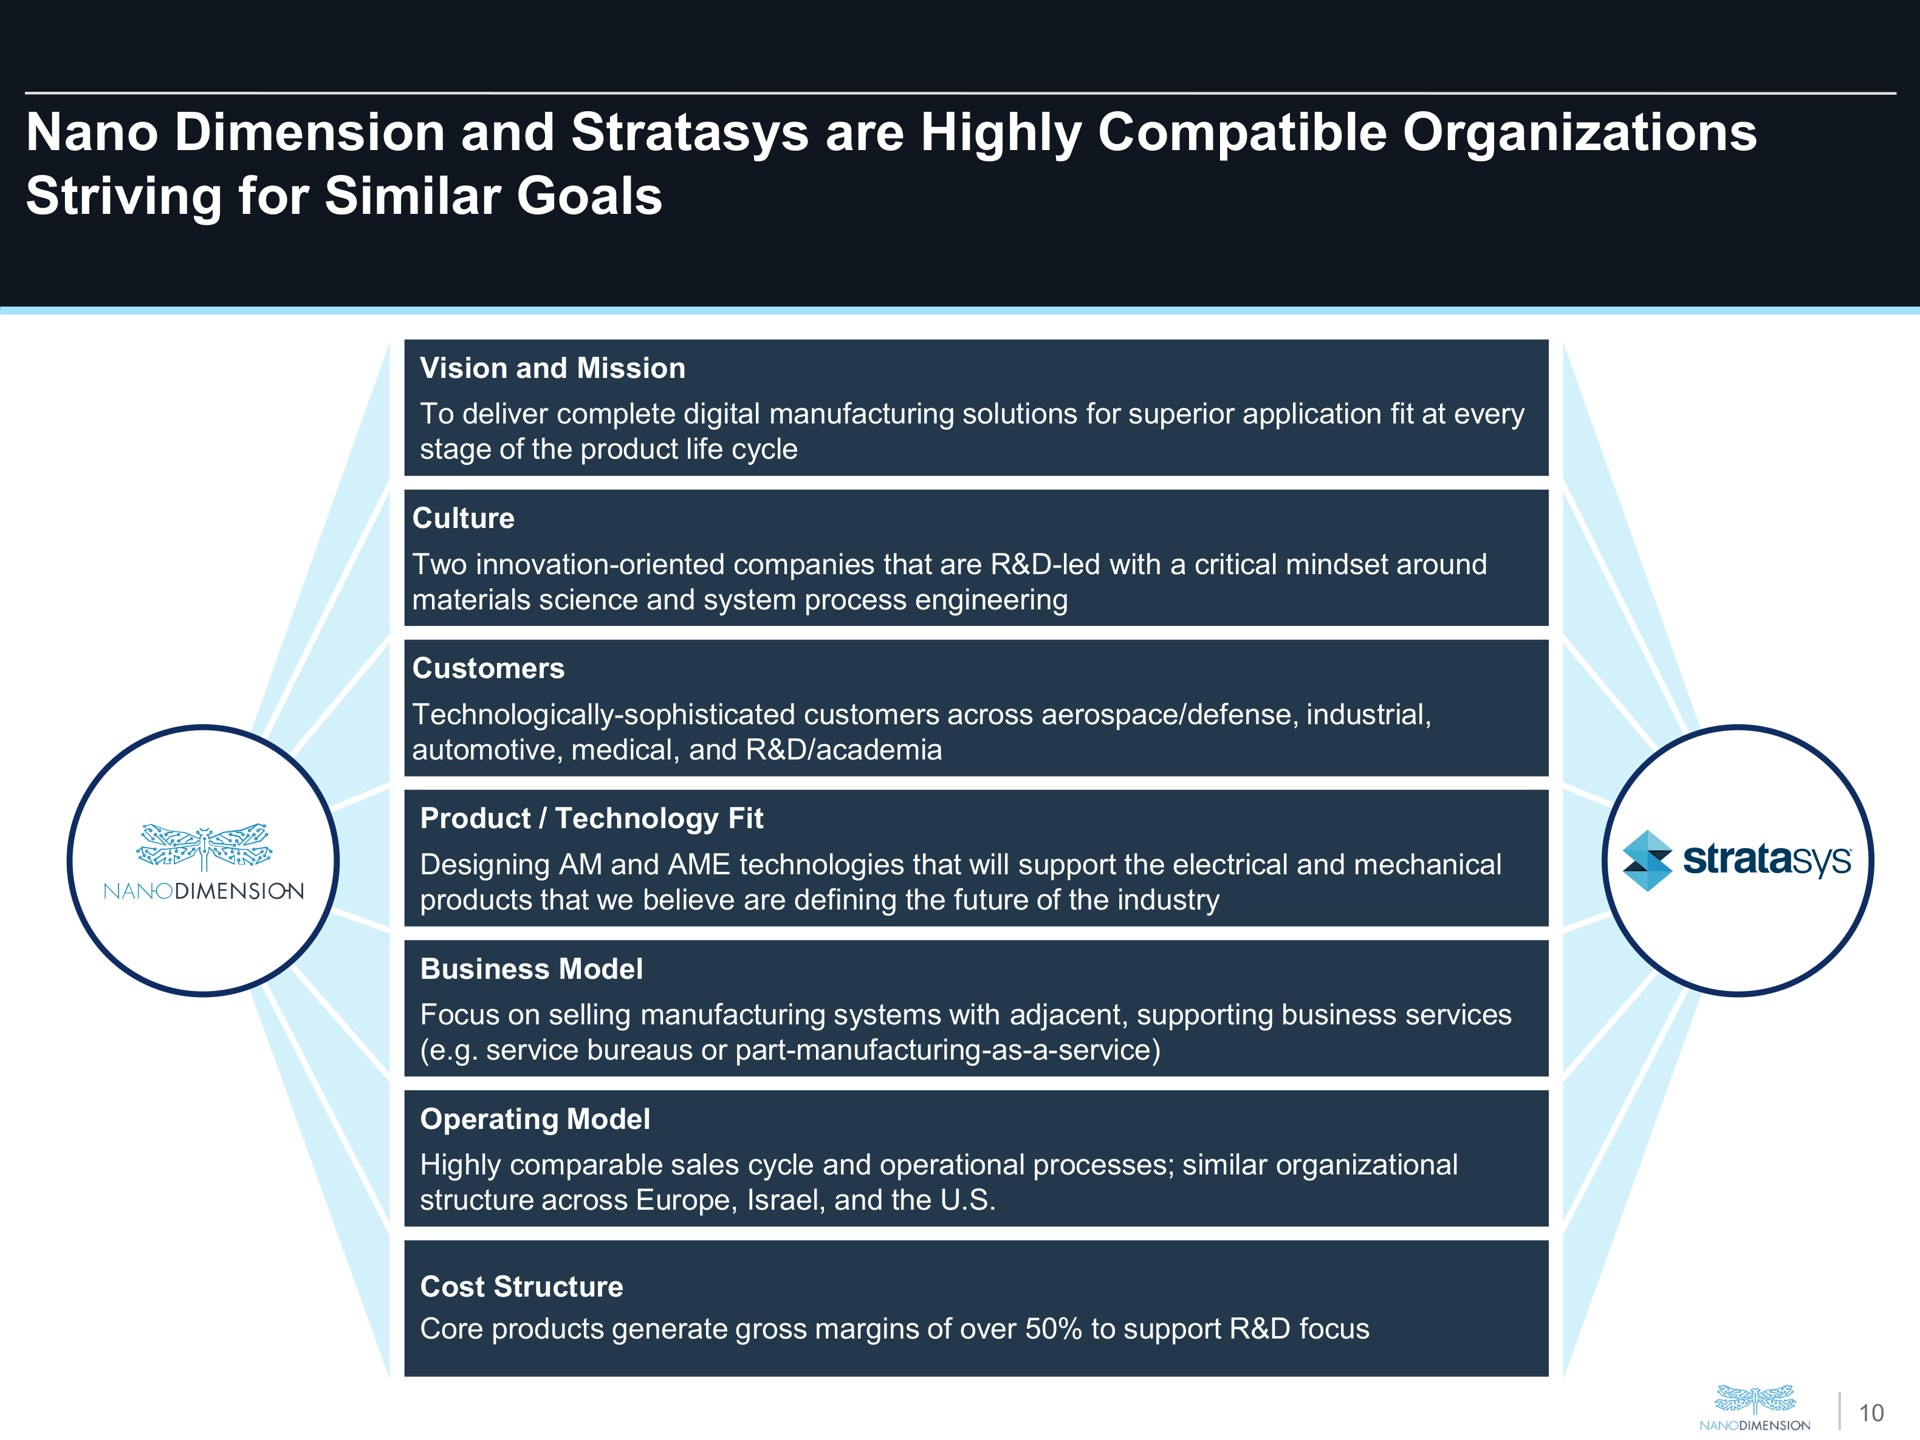 dimension and are highly compatible organizations striving for similar goals | Nano Dimension